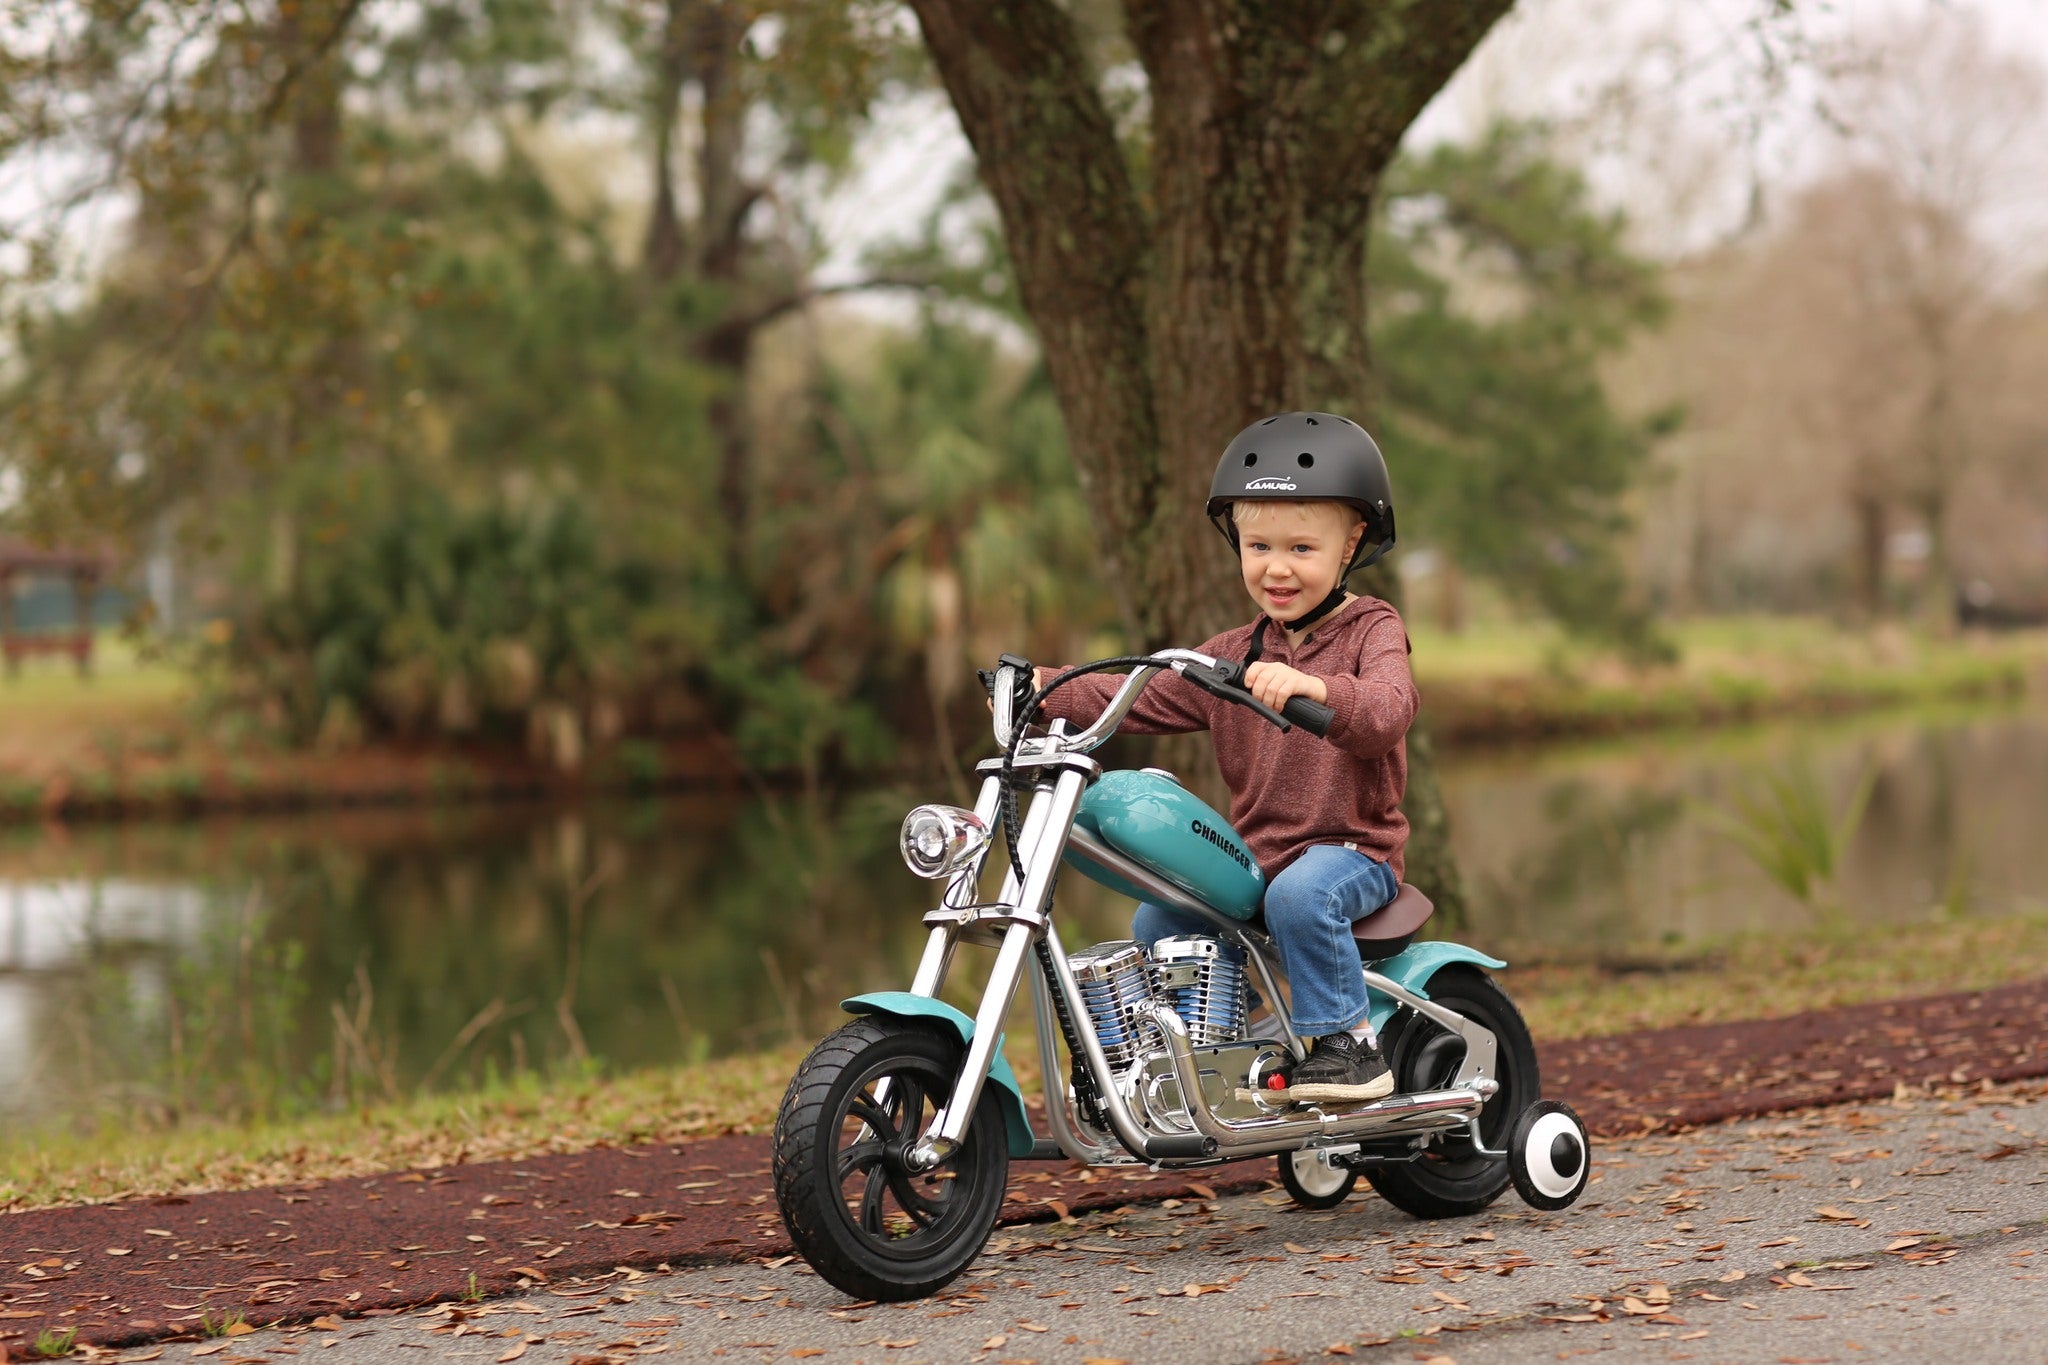 What Is the Most Fun Motorcycle for Kids to Ride?